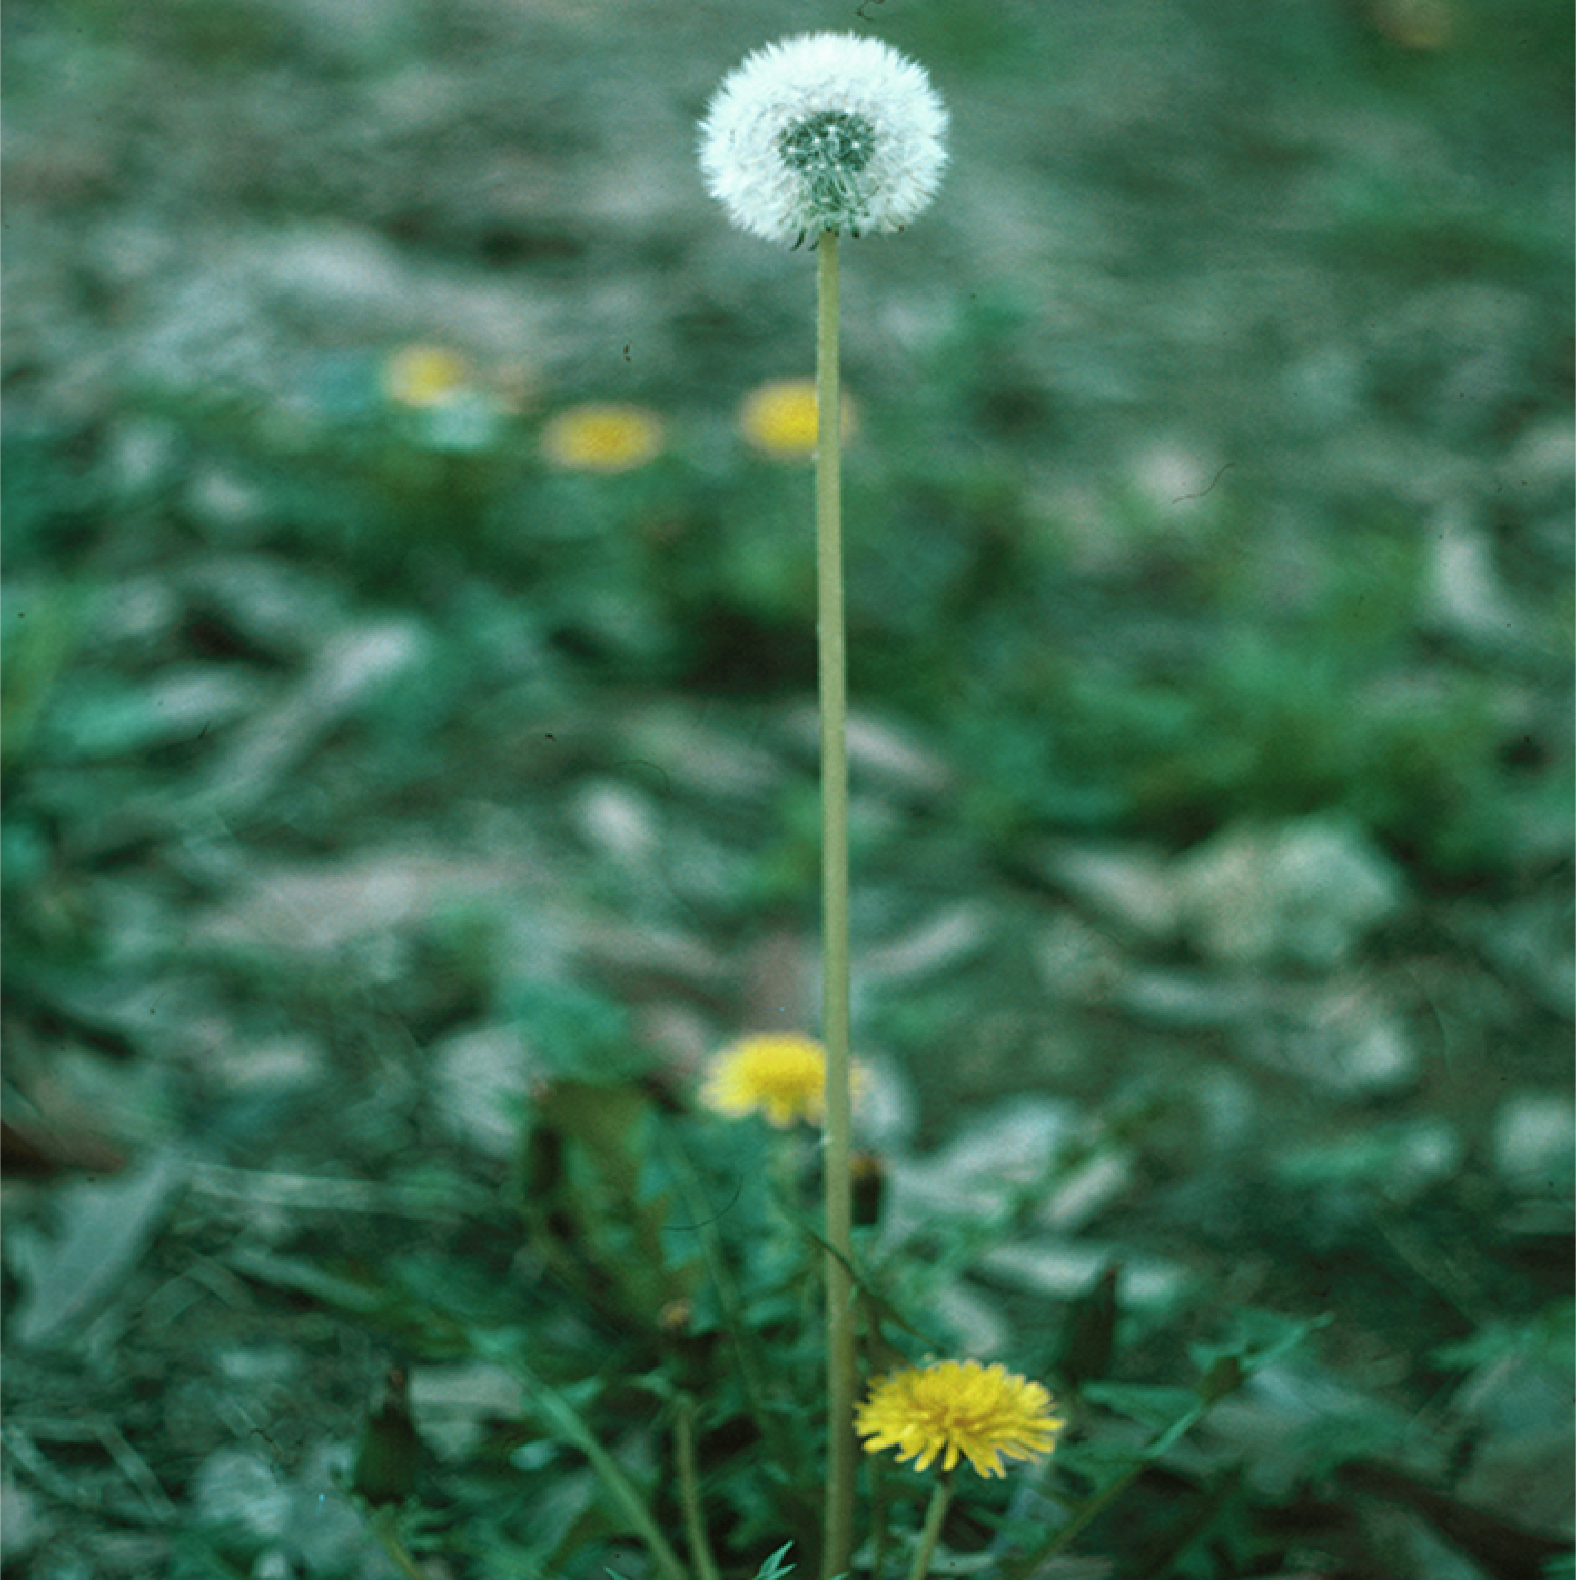 A dandelion puff ball at top with yellow flowers at bottom on a background of green.